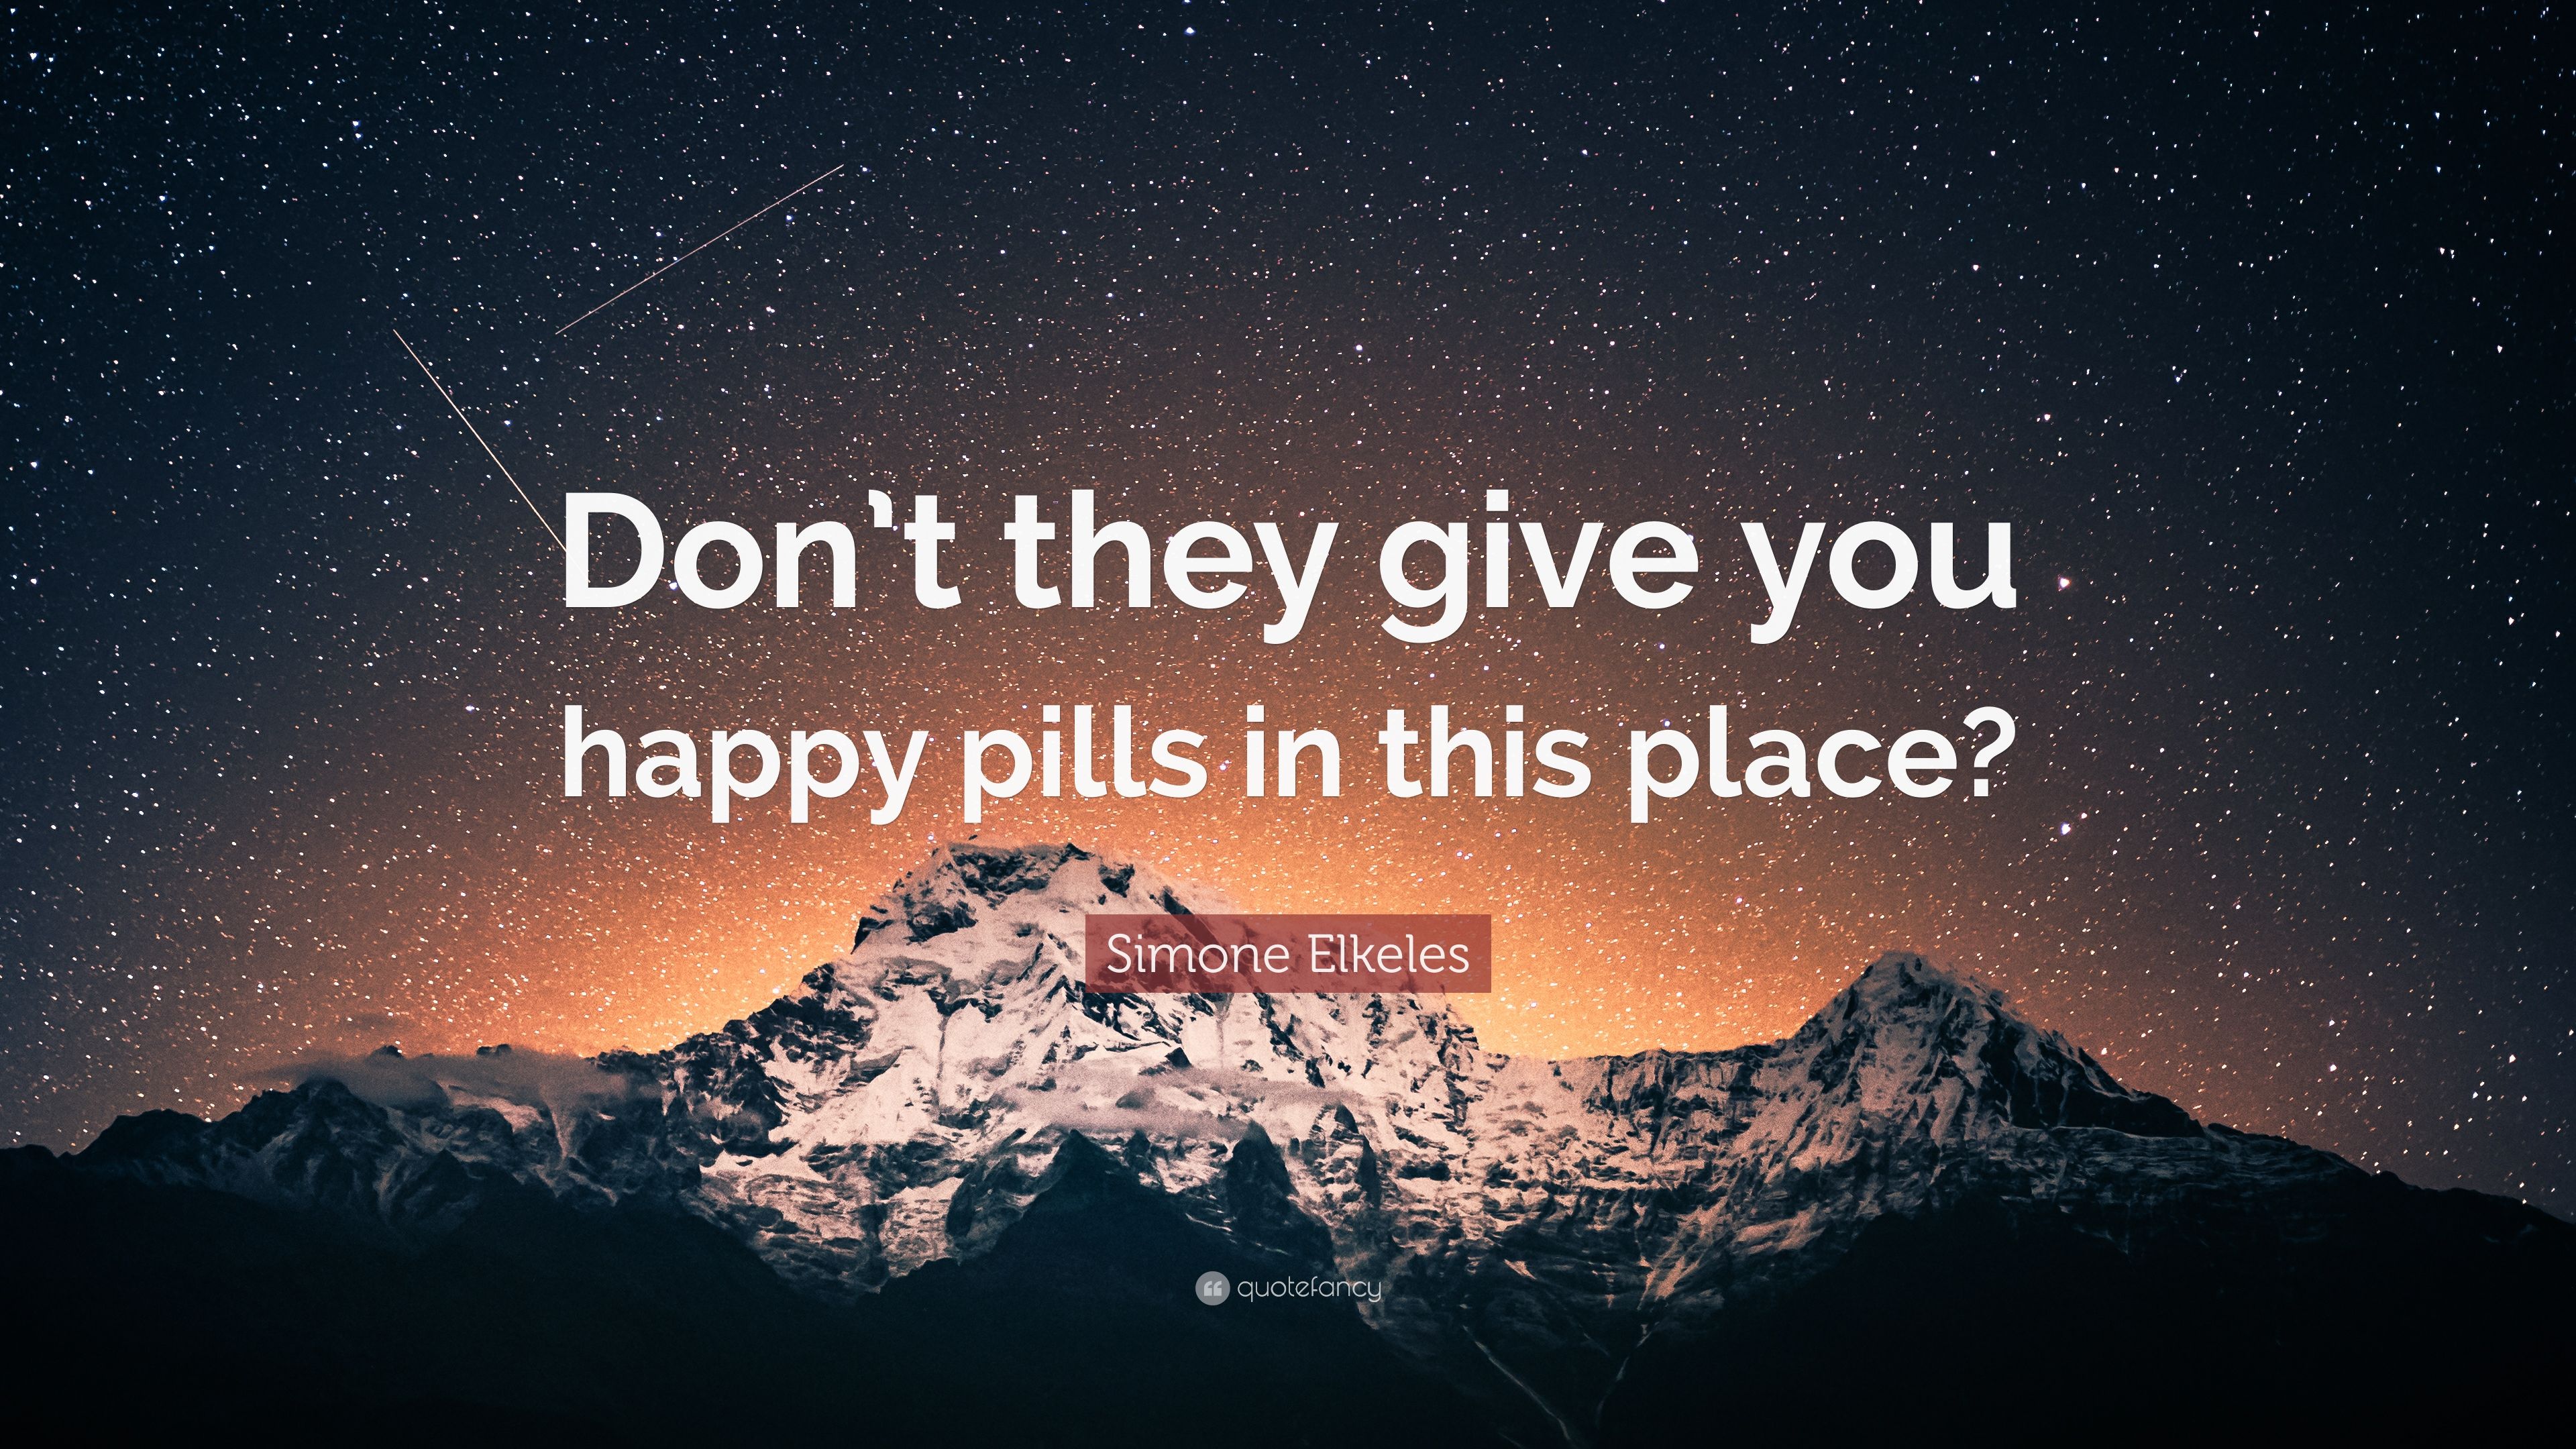 Simone Elkeles Quote: “Don't they give you happy pills